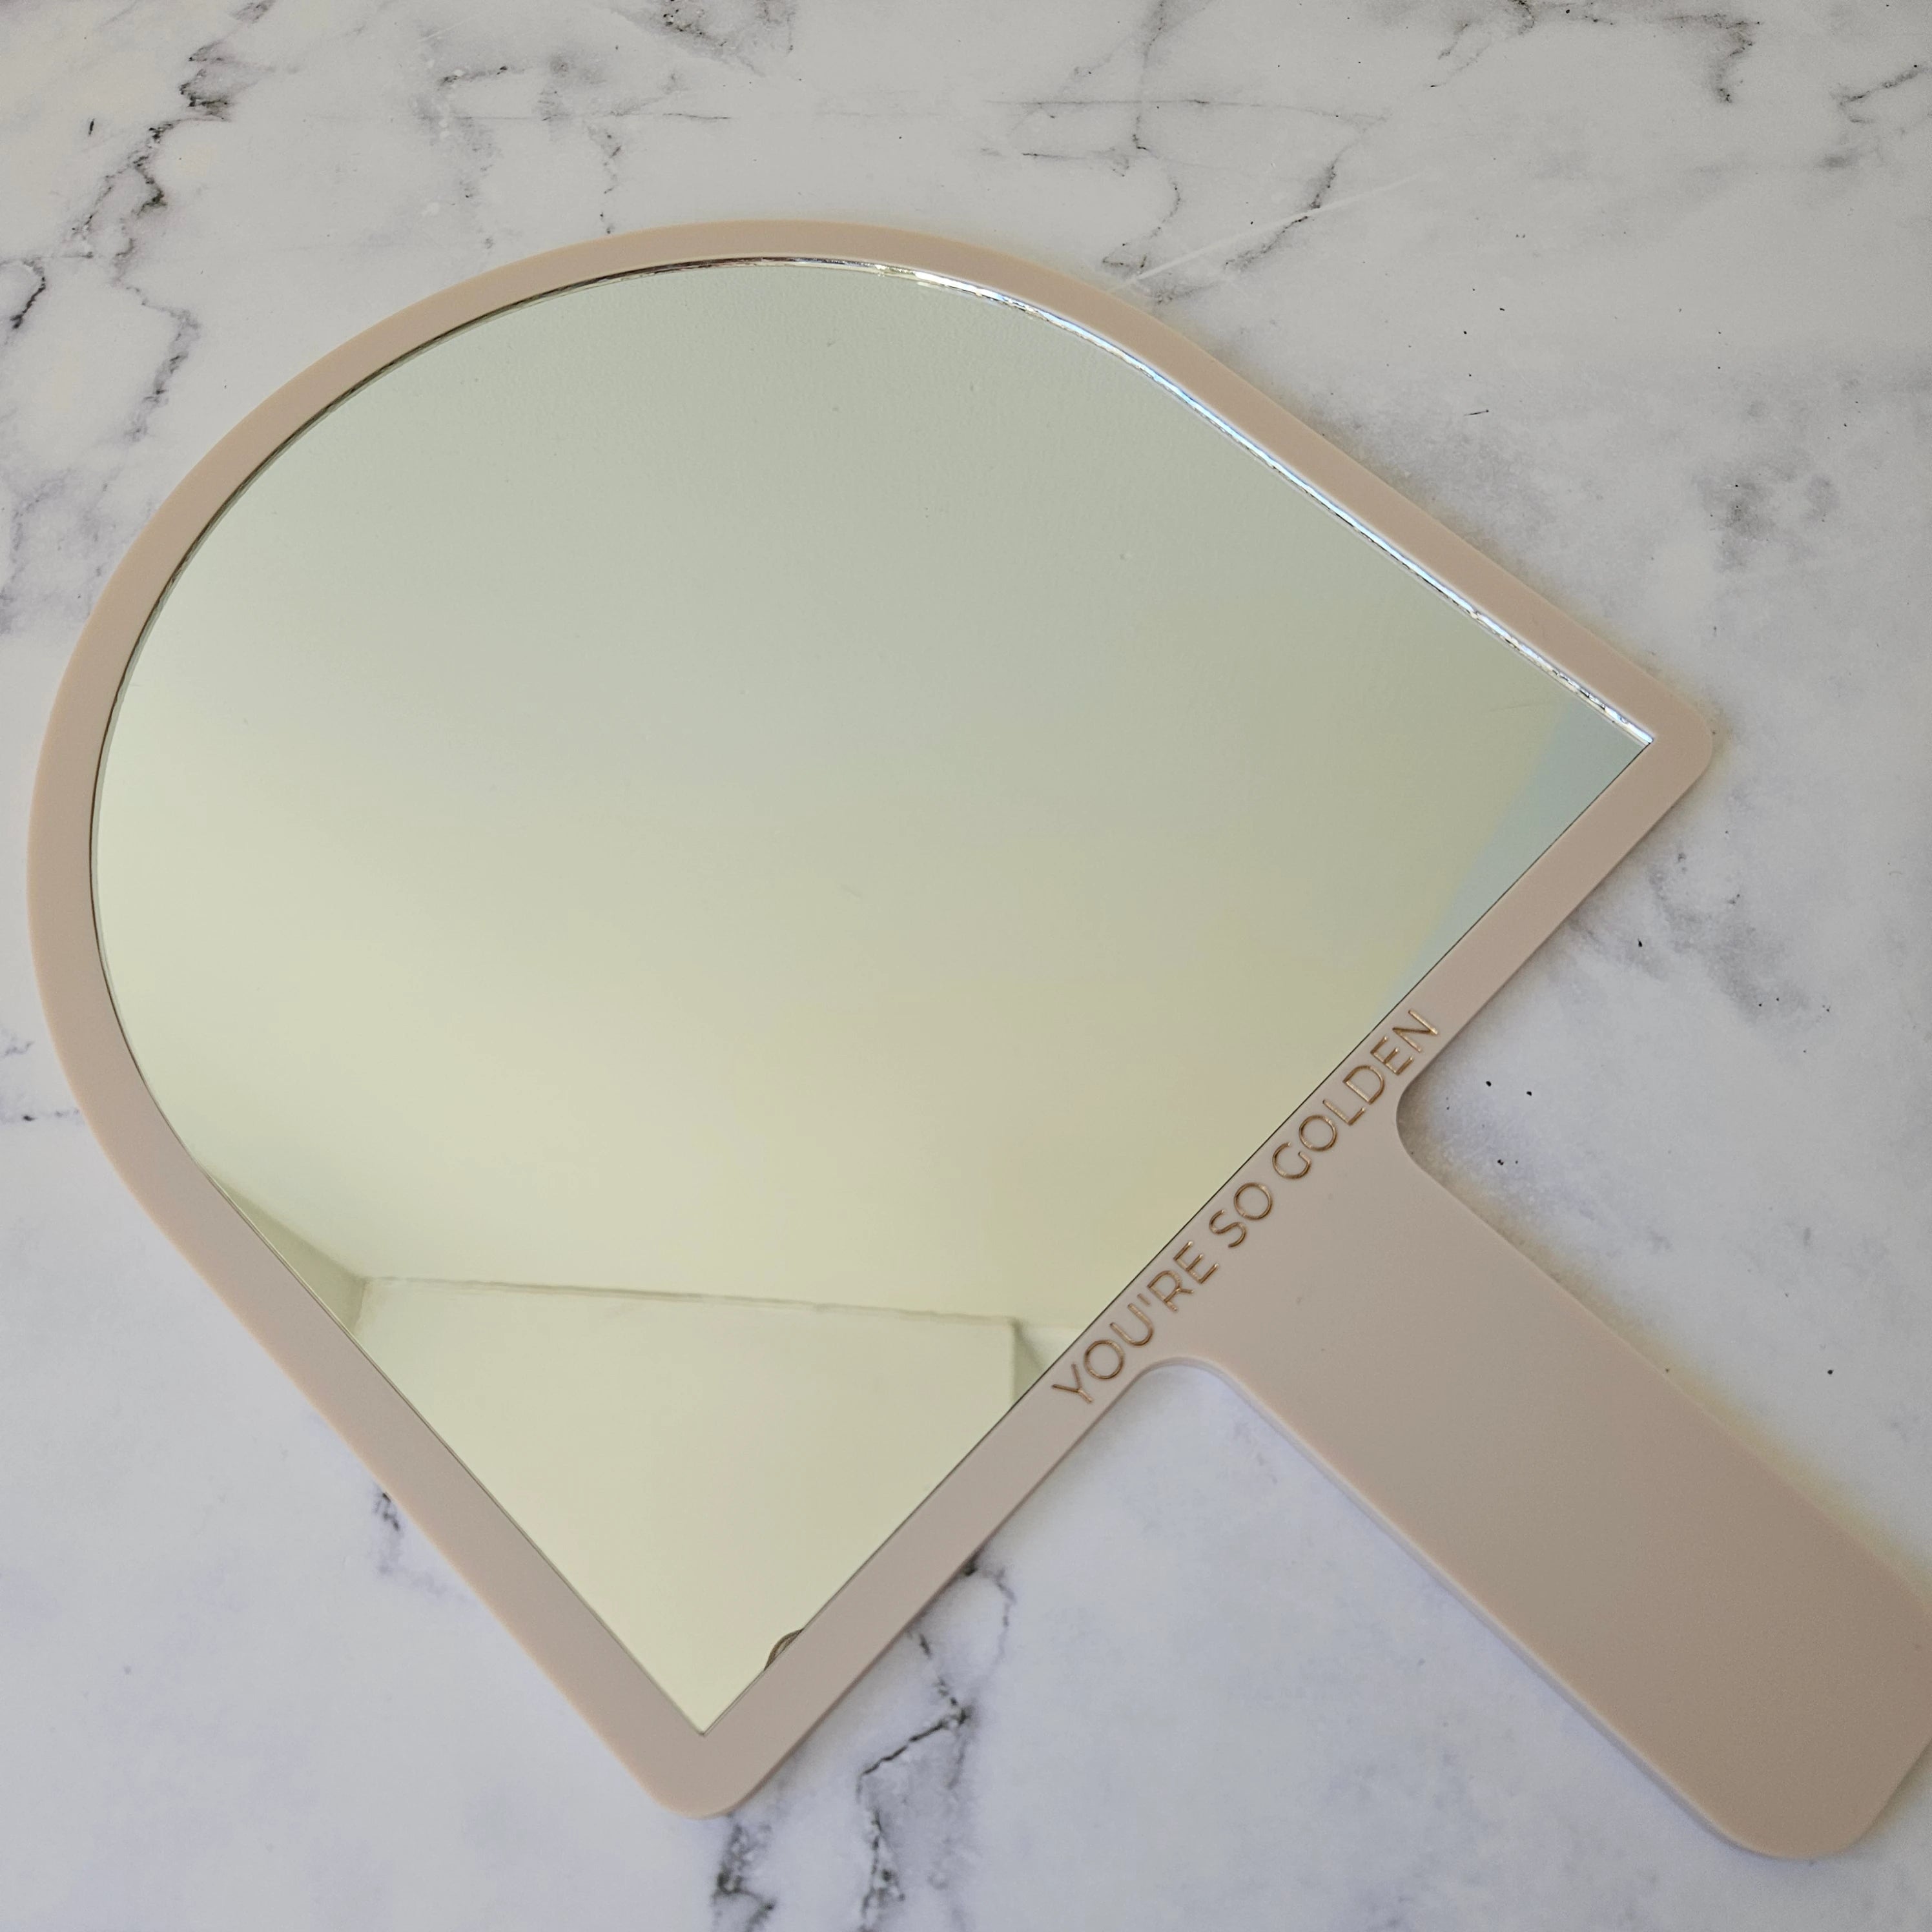 XL Arch Handheld Mirror in Dusty Pink Acrylic with Gold Writing you&